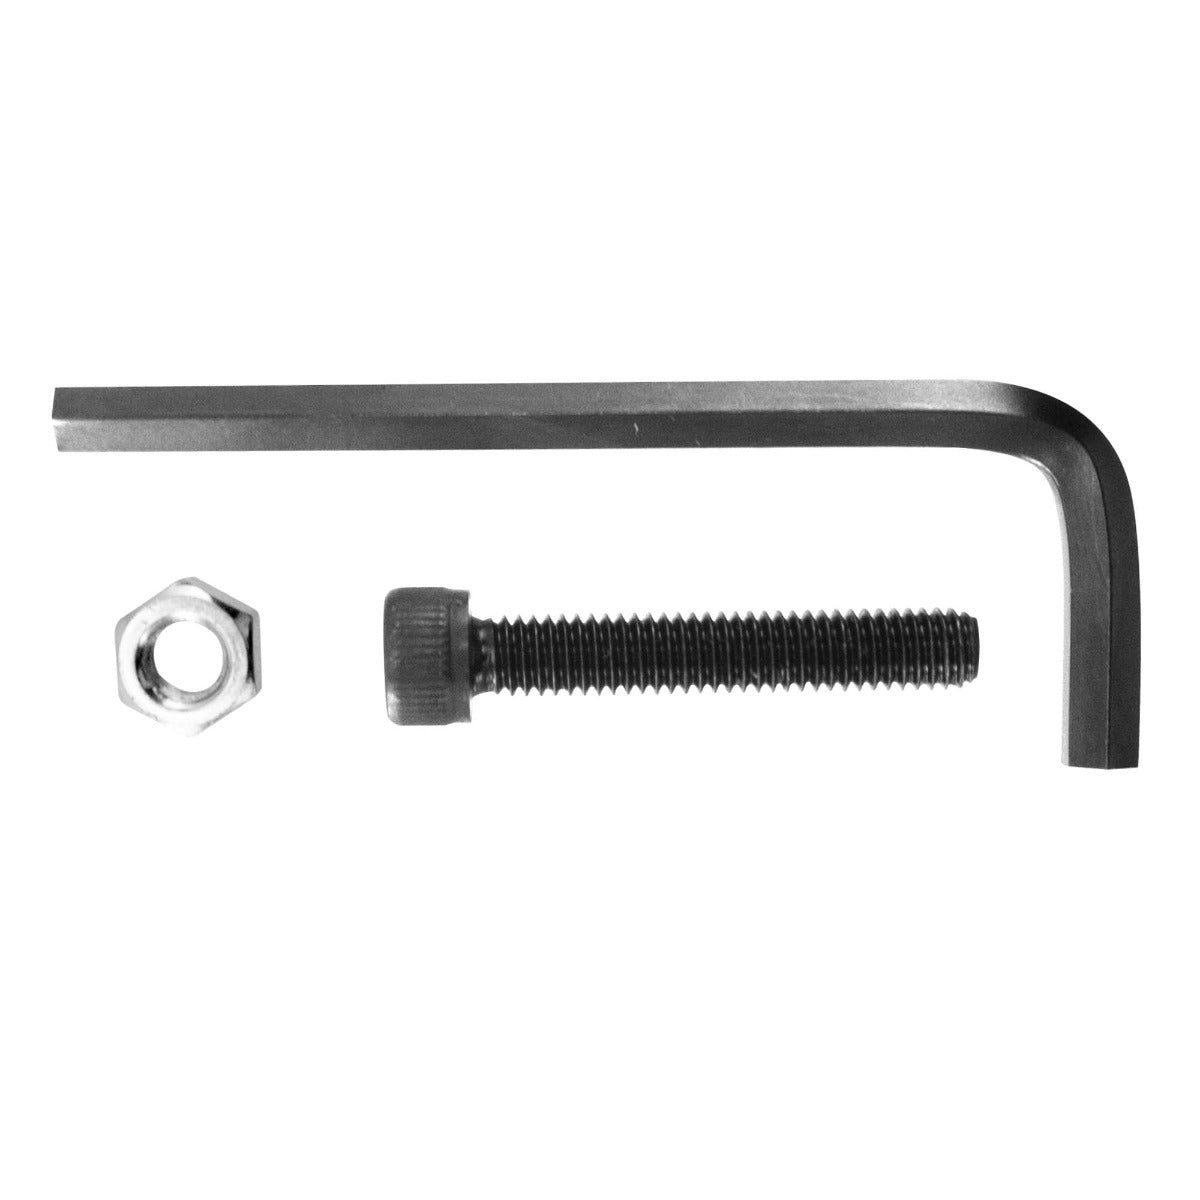 iBOLT™ Security Hardware or 1 inch / 25mm Bizmount™ Arms